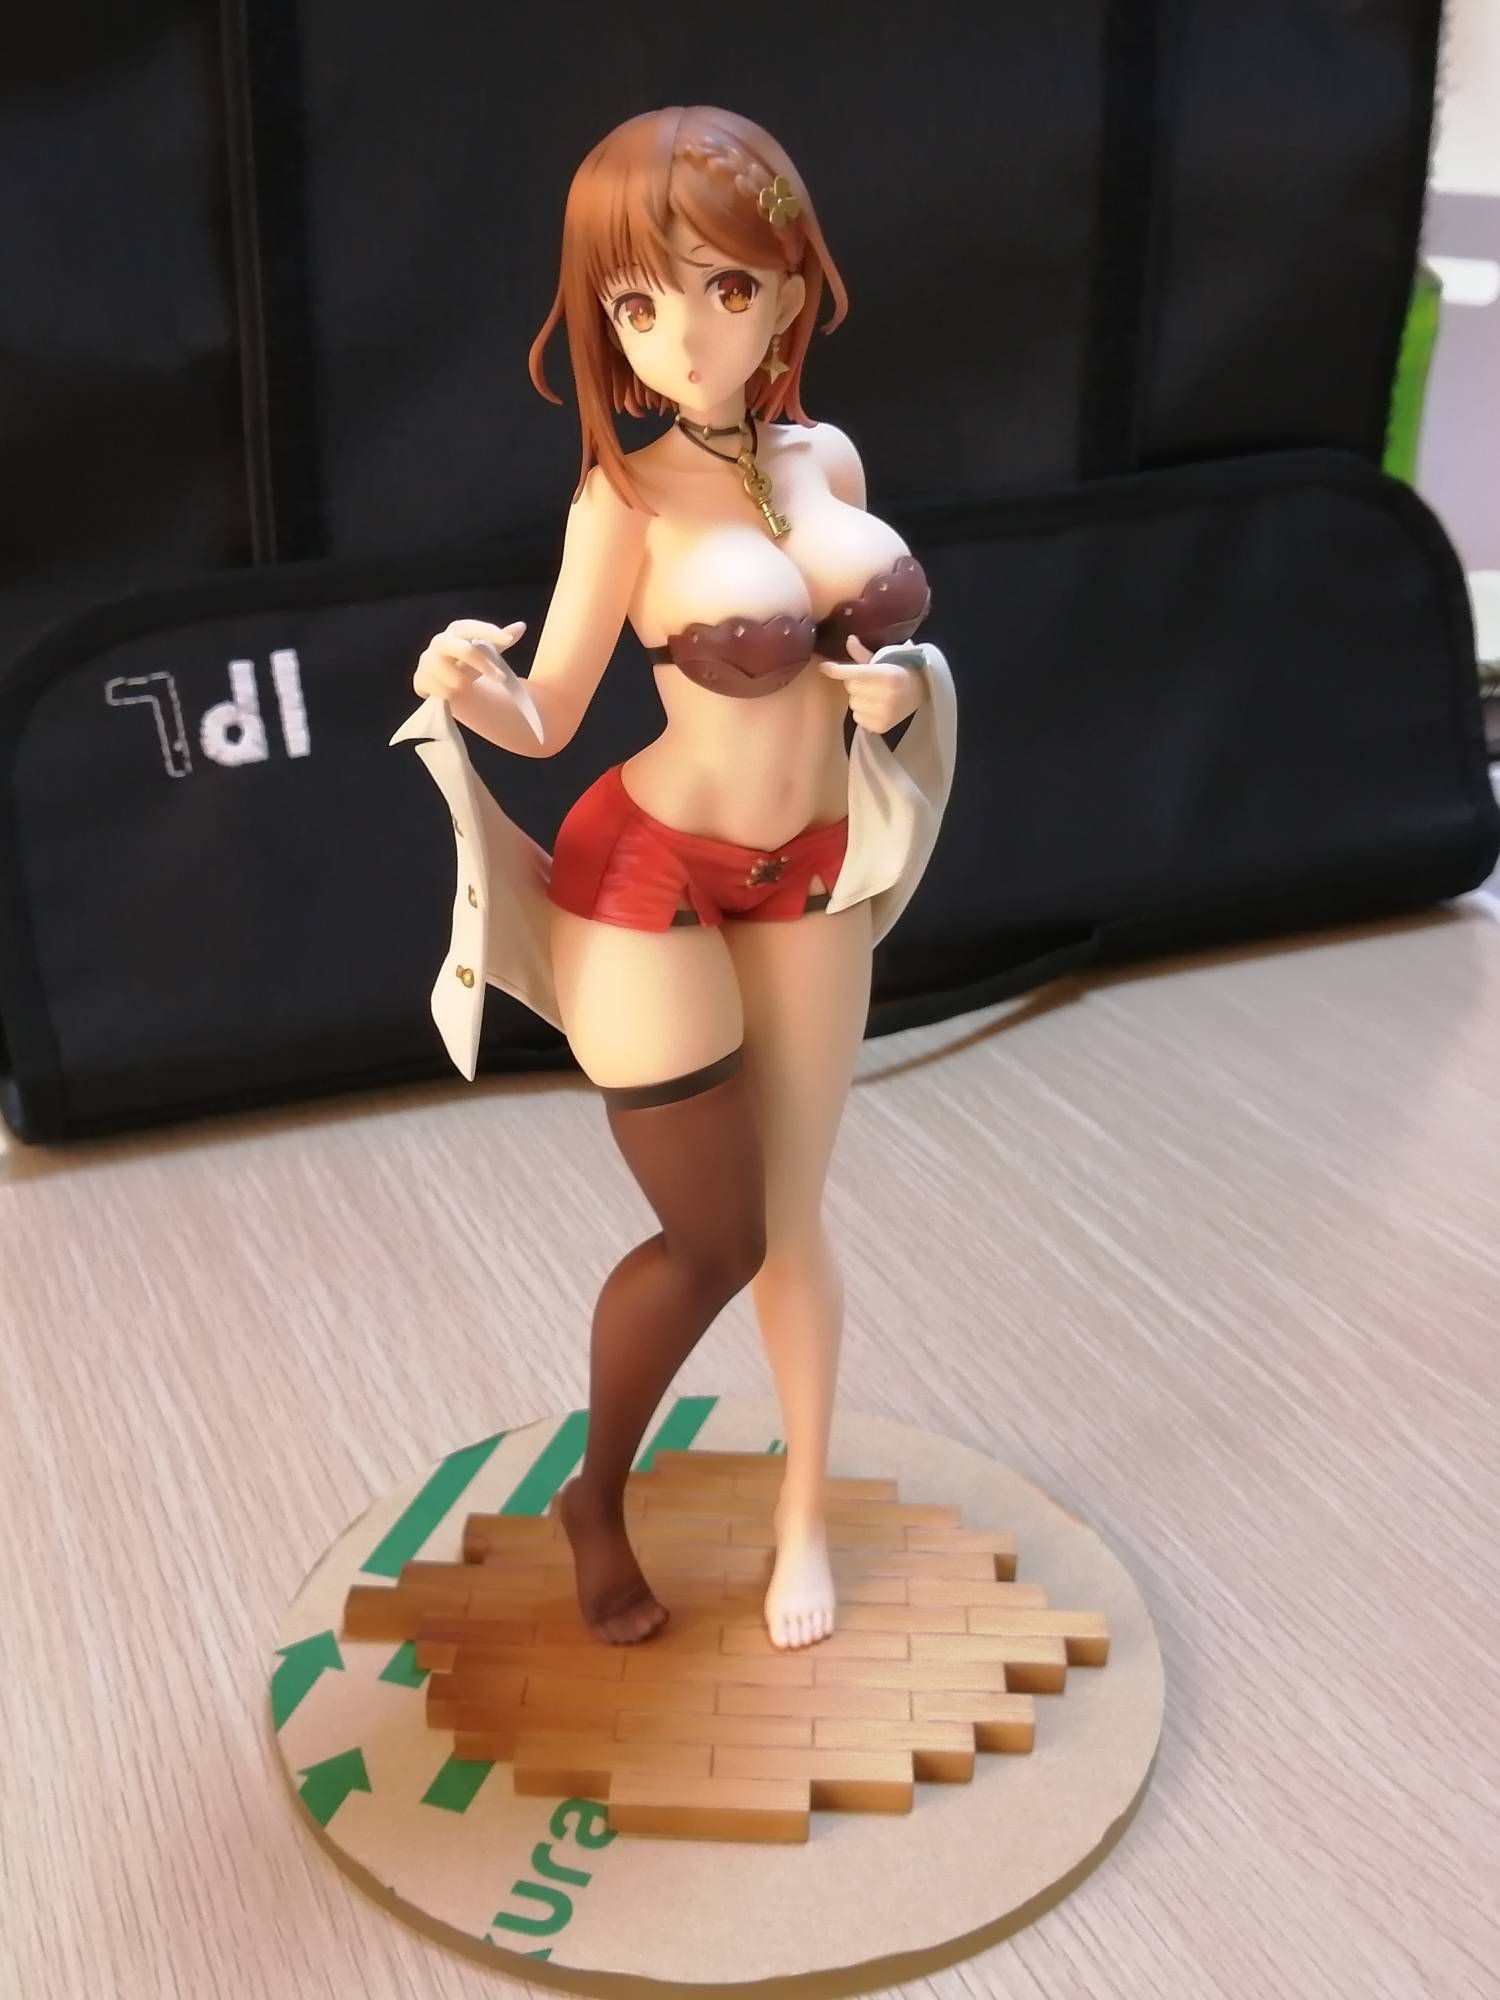 Office 【Image】New Figure Wwwwwwww Too Etch Called "Change Of Clothes Riser" Brasileira